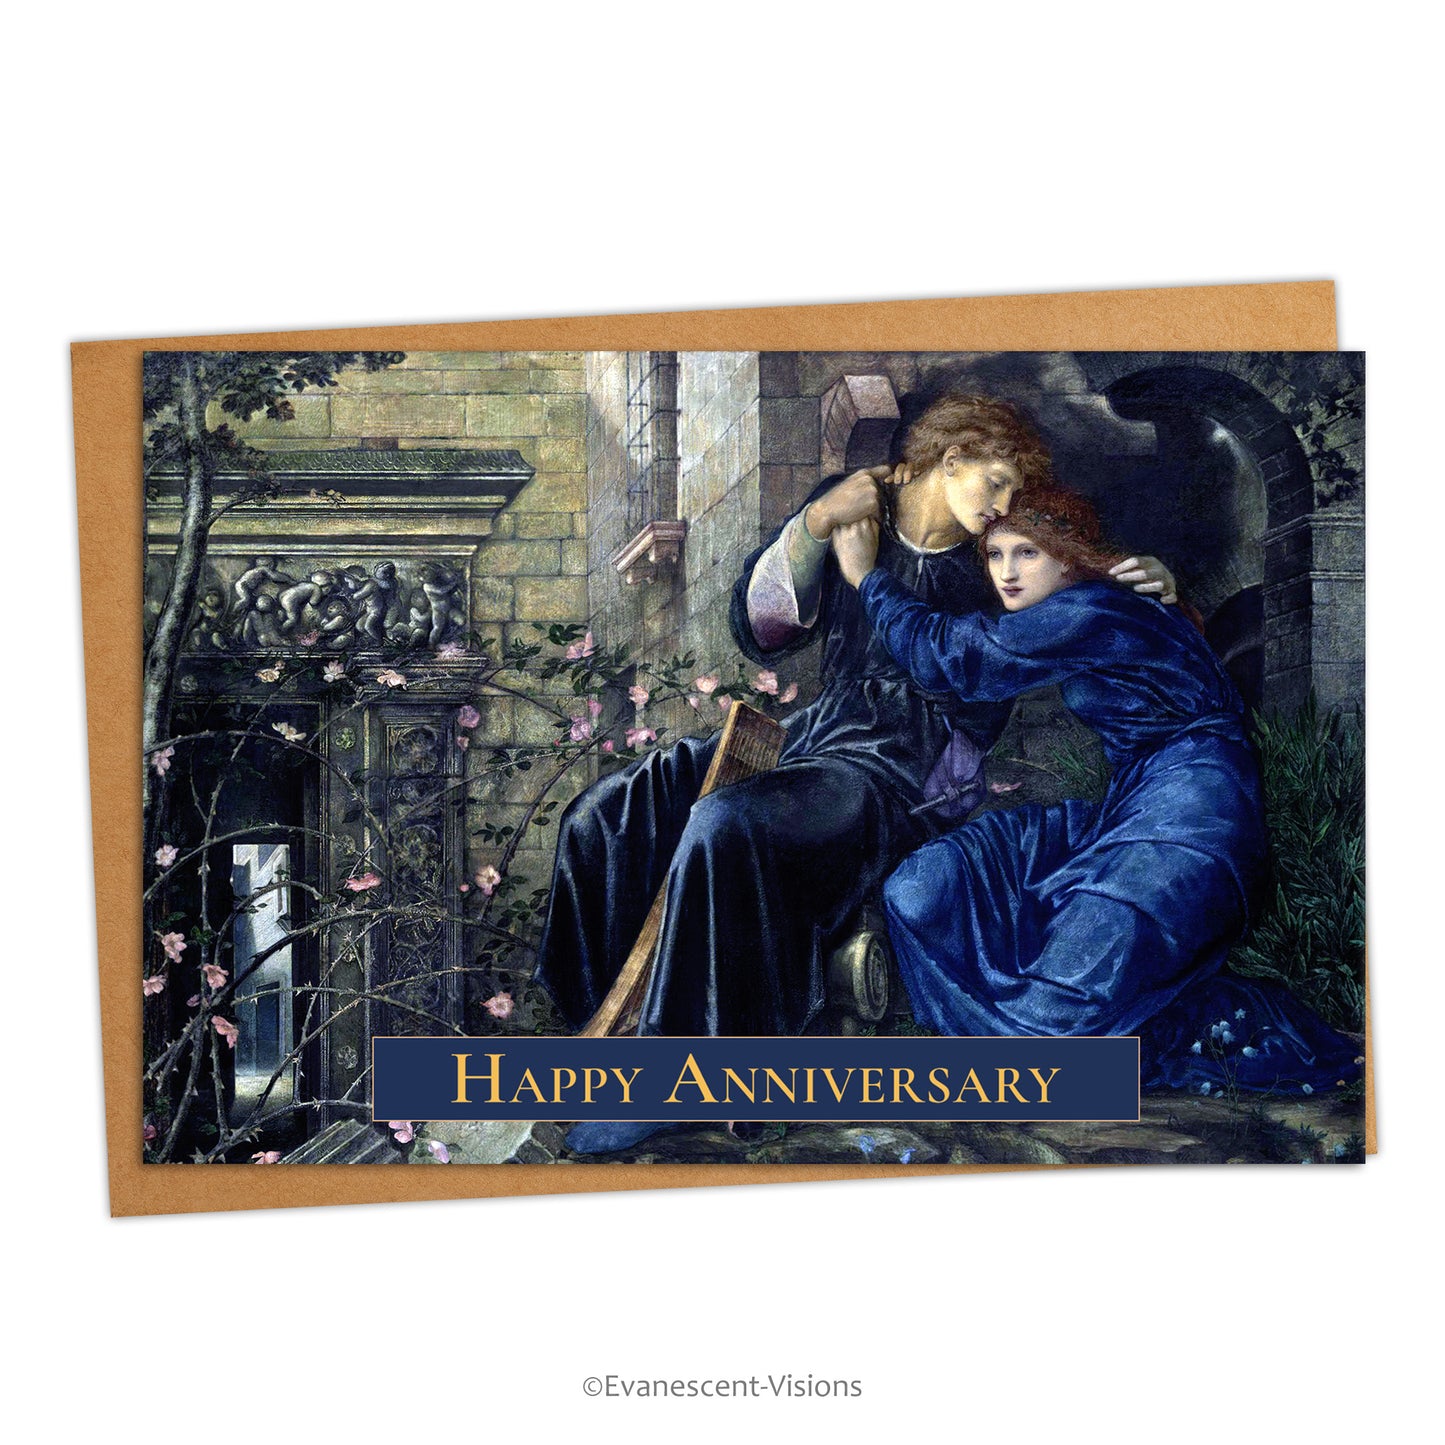 Card and envelope. Card has 'Love among the Ruins' by Edward Burne-Jones and 'Happy Anniversary' on front